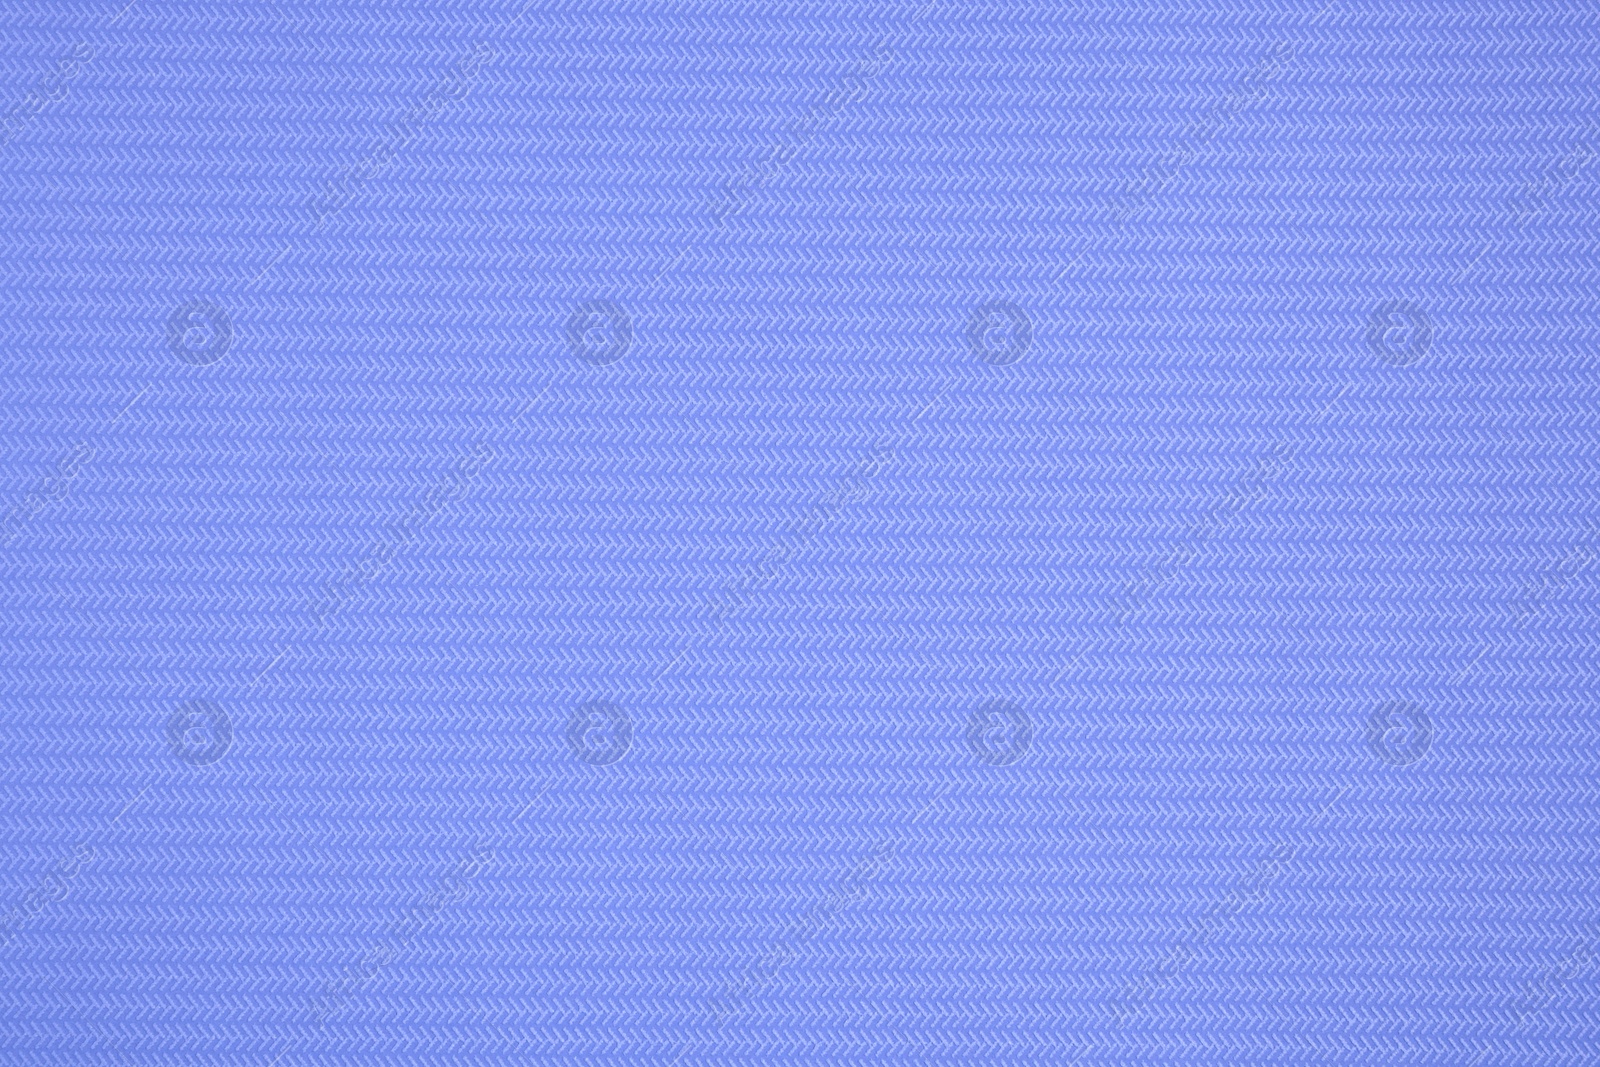 Image of Blue wallpaper sheet as background, top view